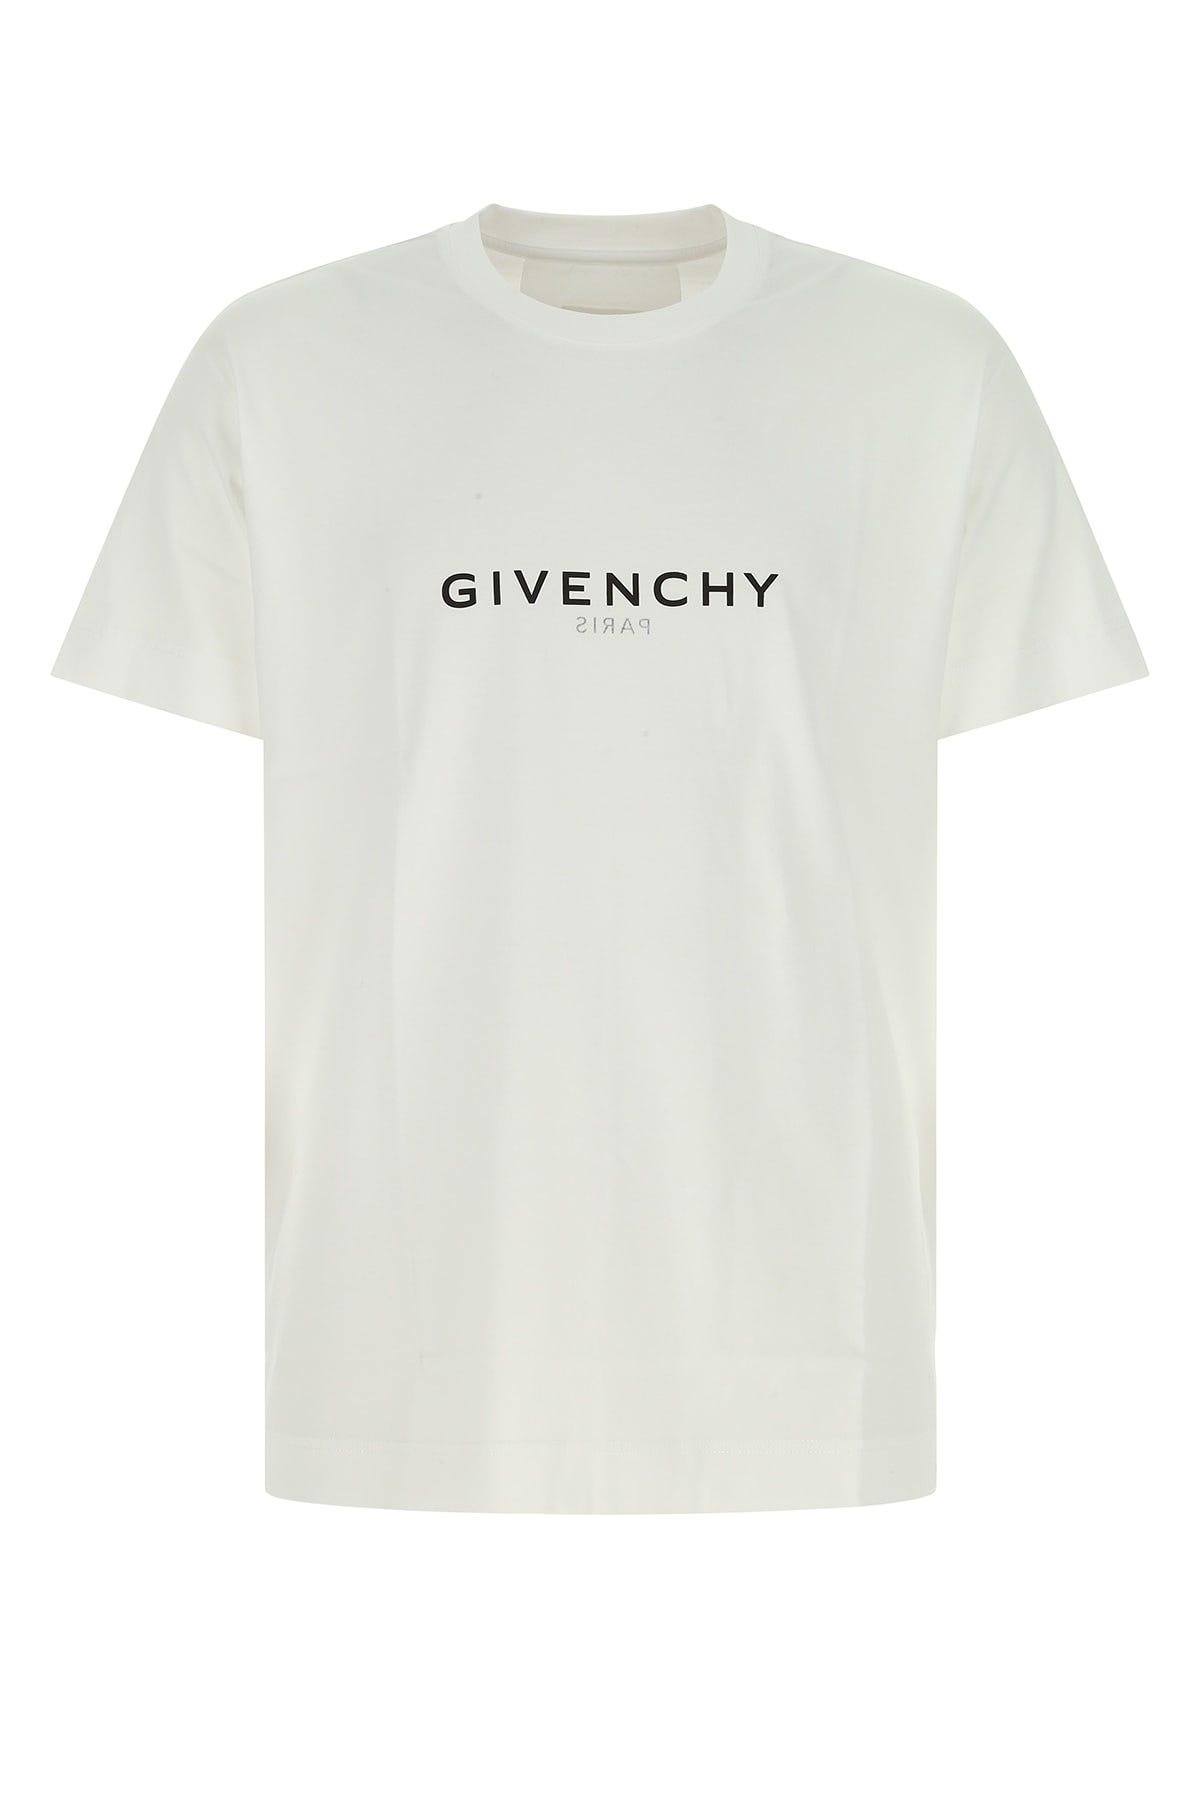 Givenchy T-hirt in White for Men | Lyst